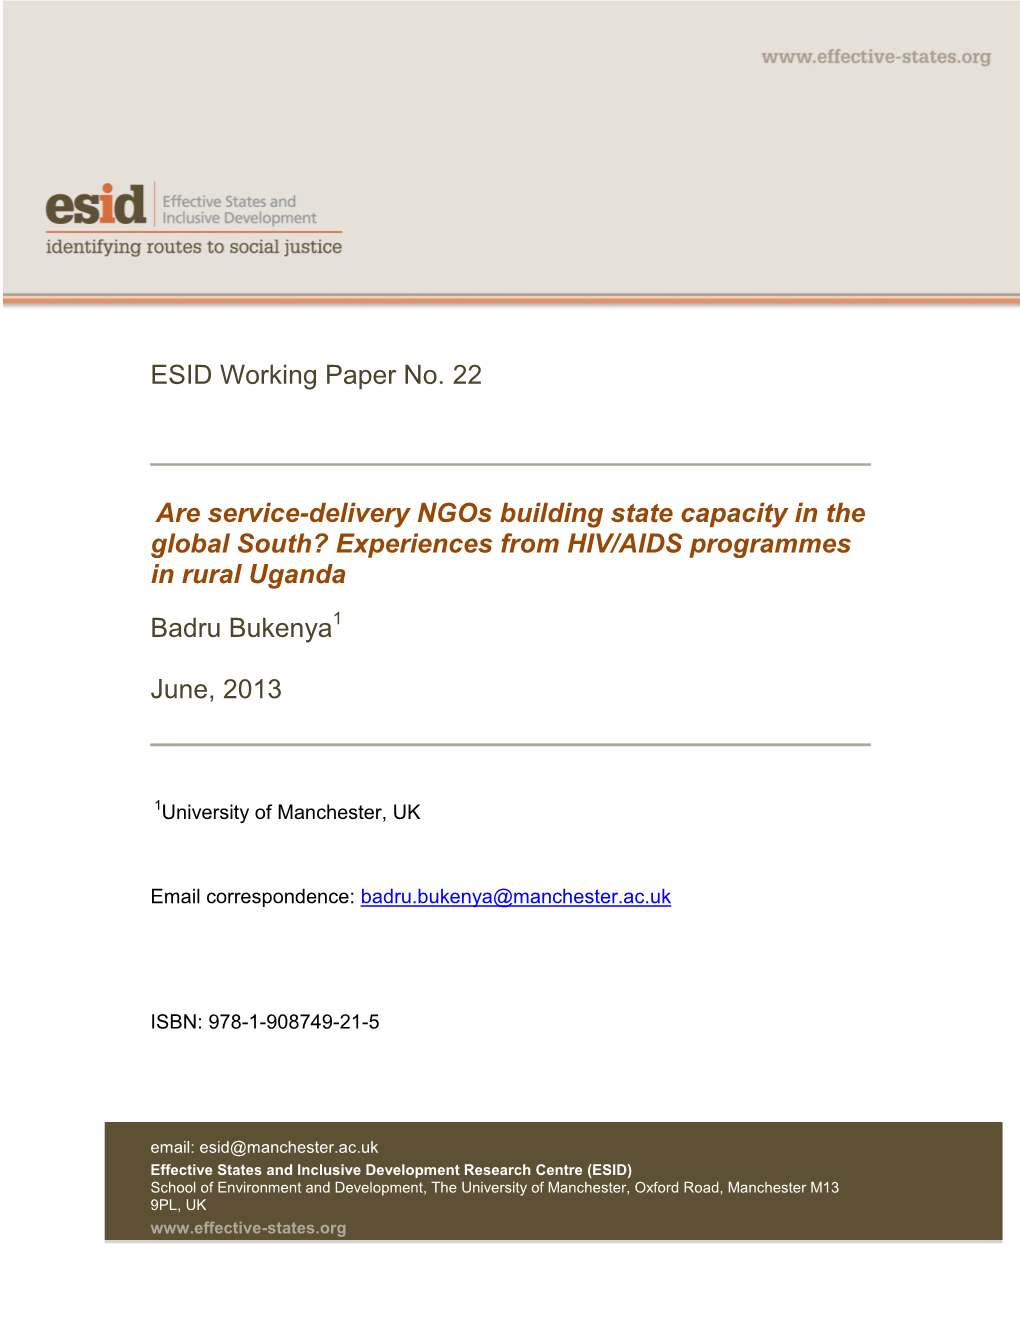 ESID Working Paper No. 22 Are Service-Delivery Ngos Building